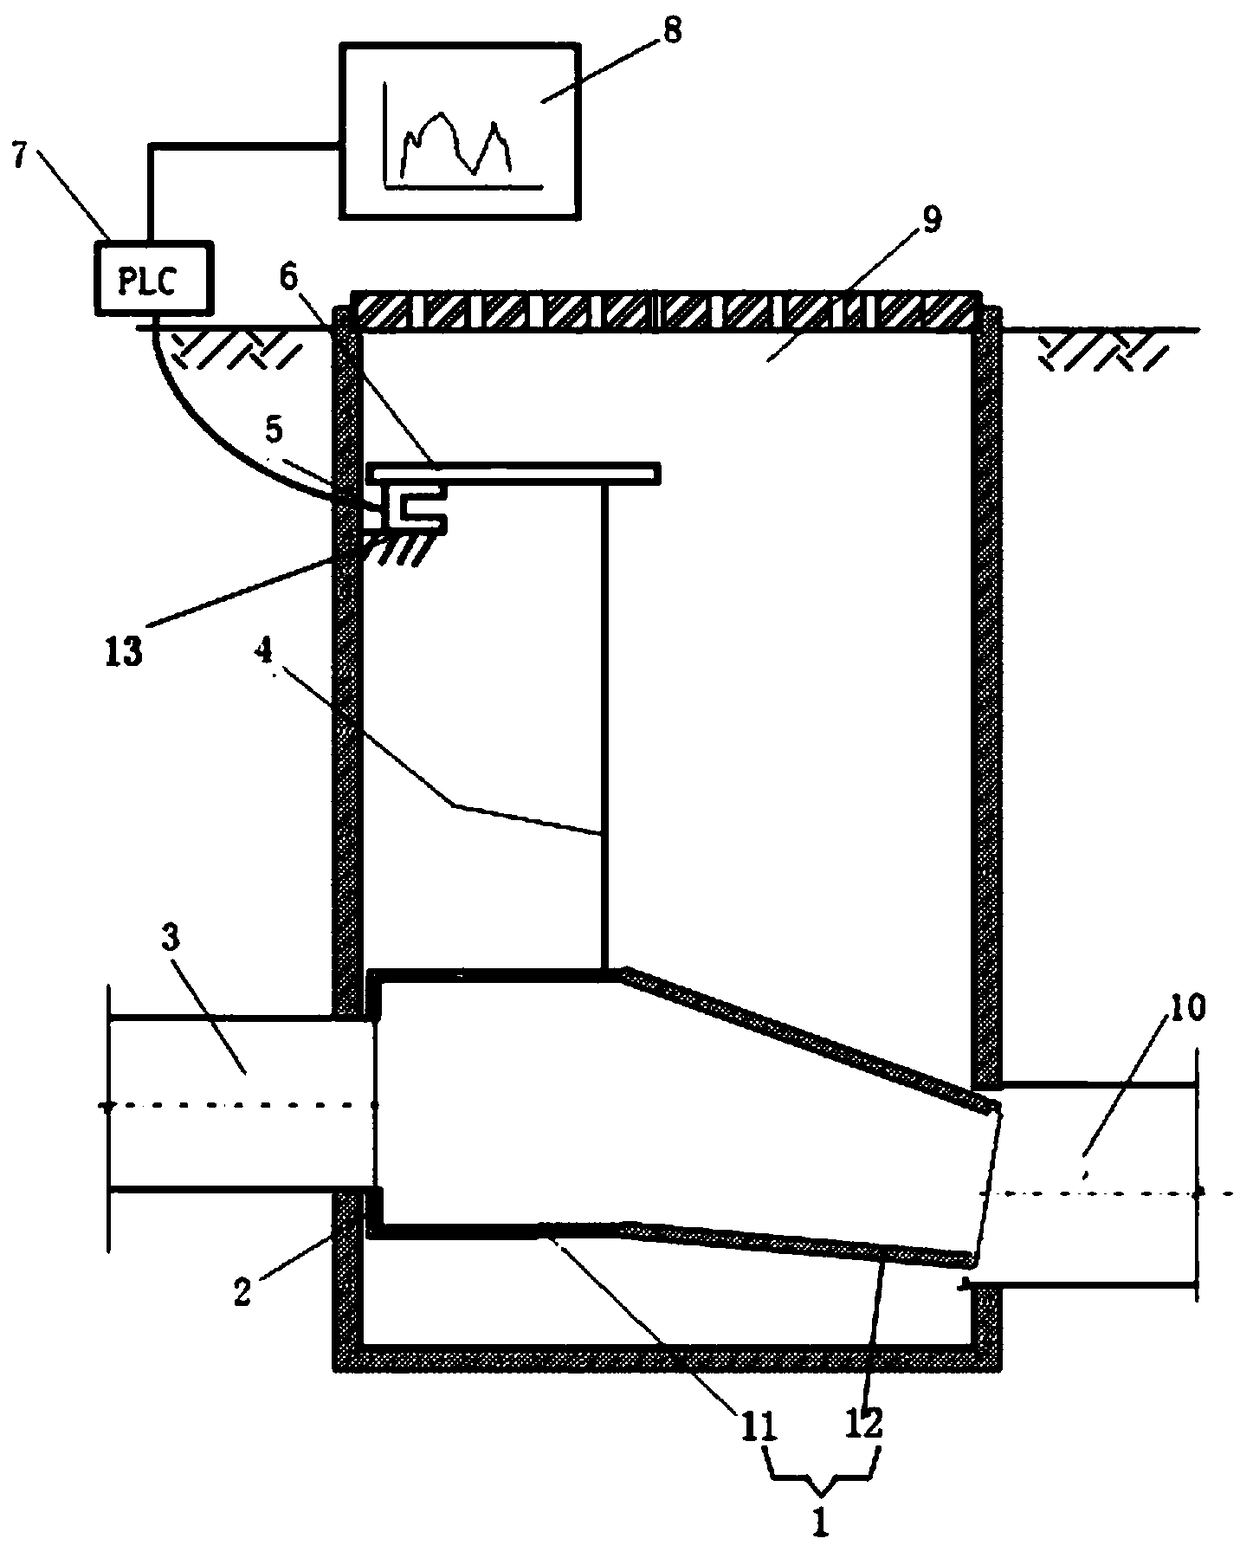 Measurement device for flow of rainwater runoff